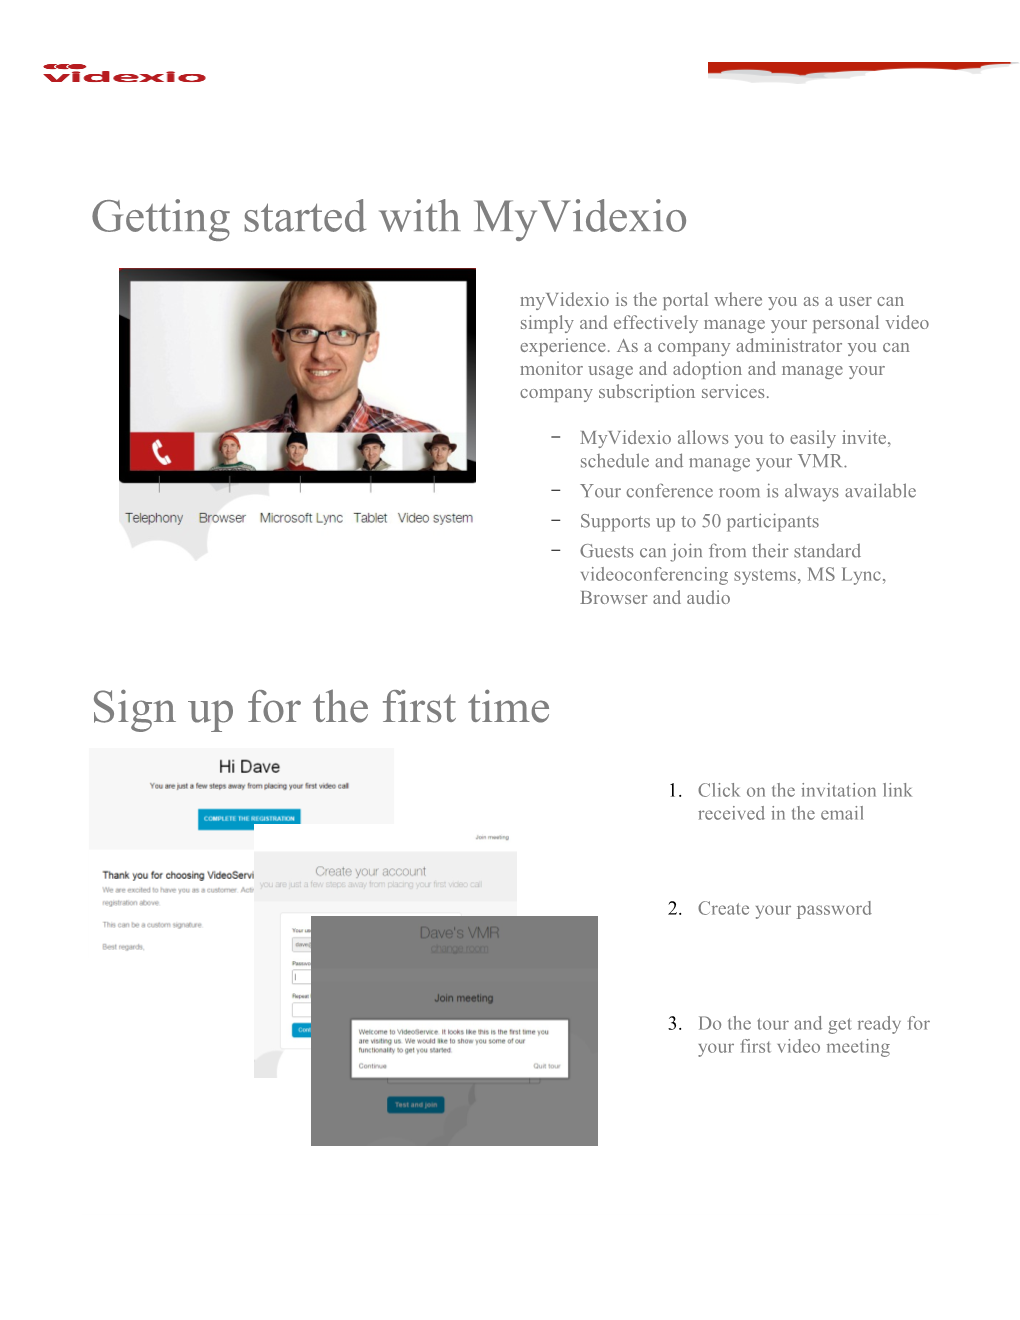 Getting Started with Myvidexio